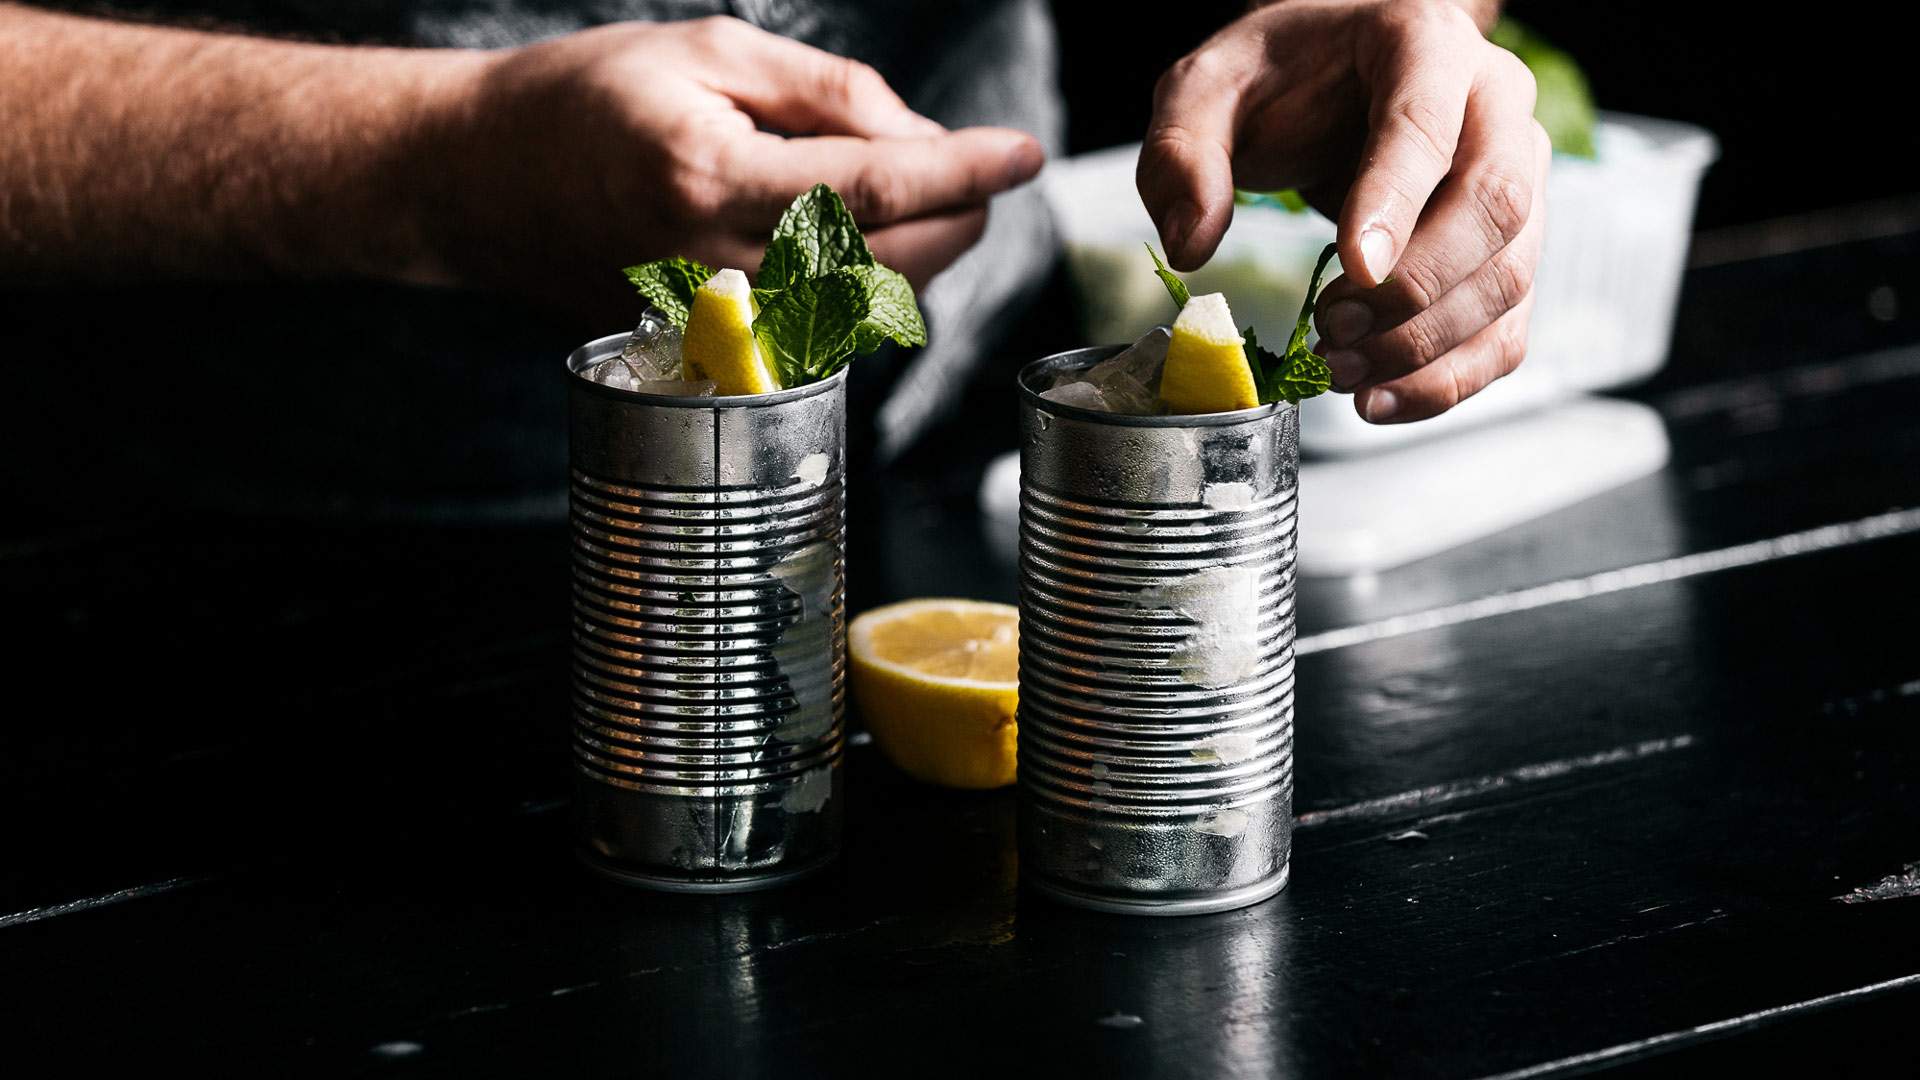 We're Giving Away Tickets to an Intimate Cocktail Making Class at The Bridge Hotel